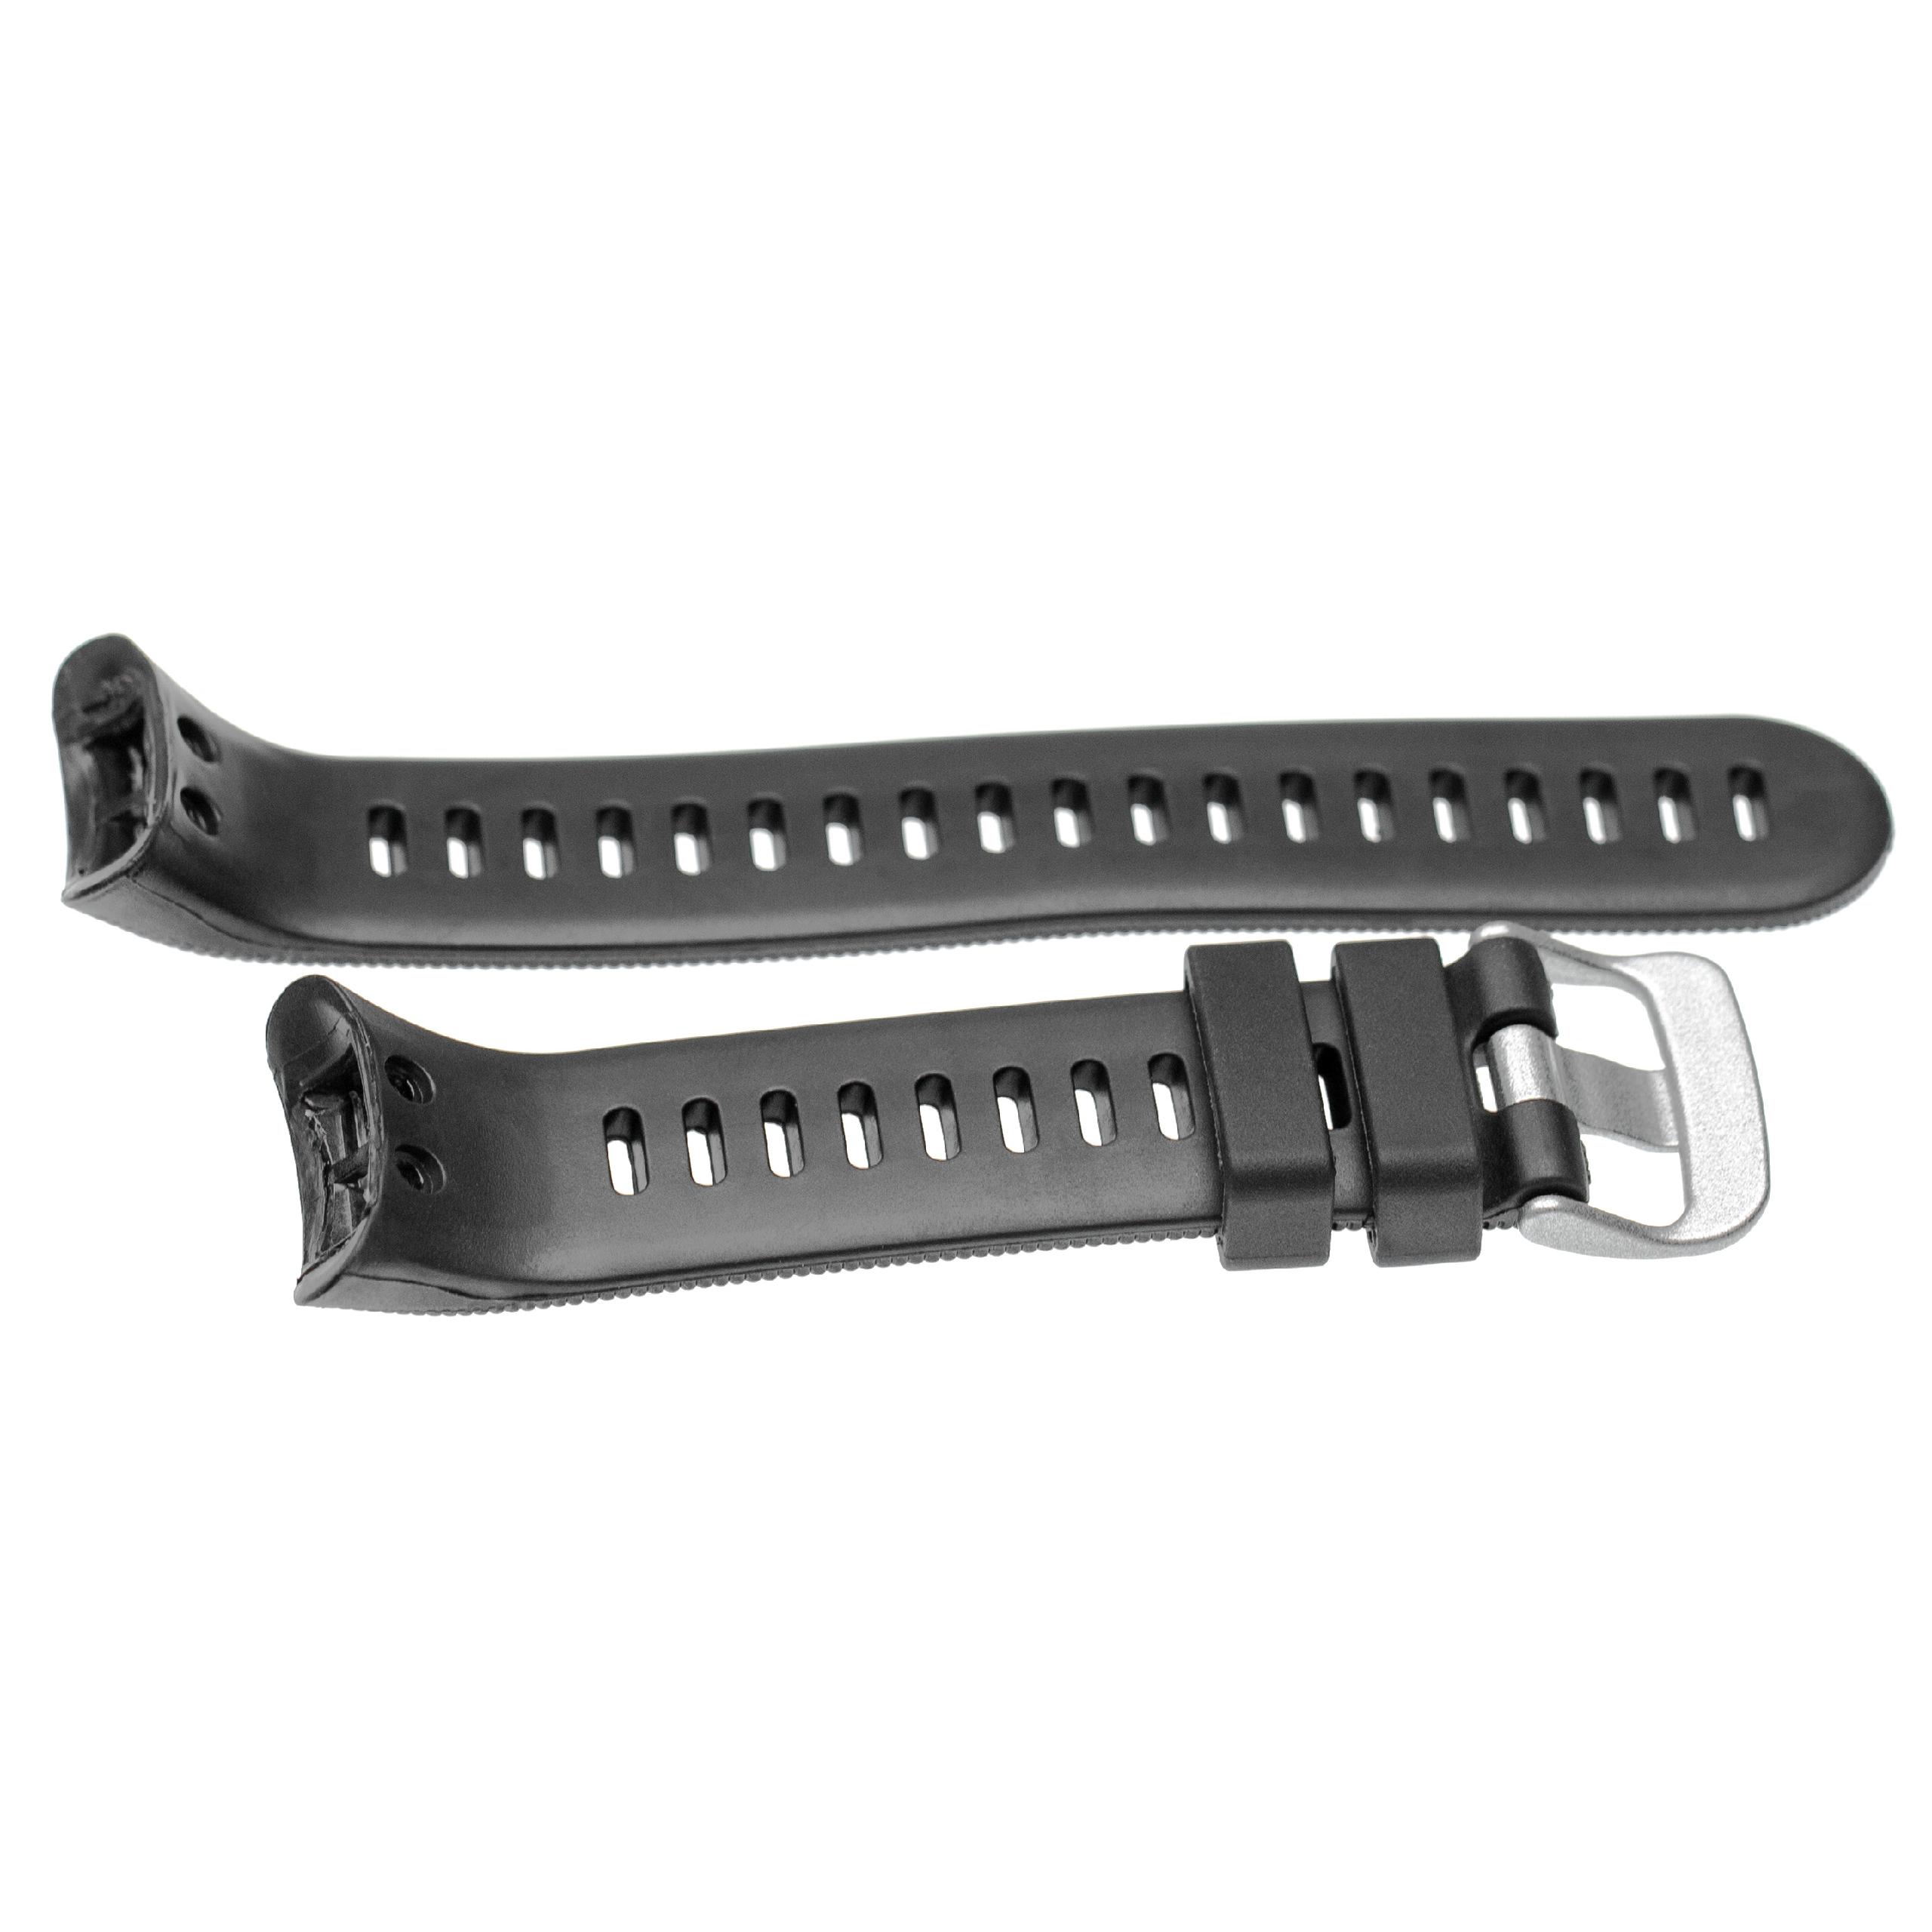 wristband for Garmin Forerunner Smartwatch - 11.6 + 9.1 cm long, 25mm wide, silicone, black